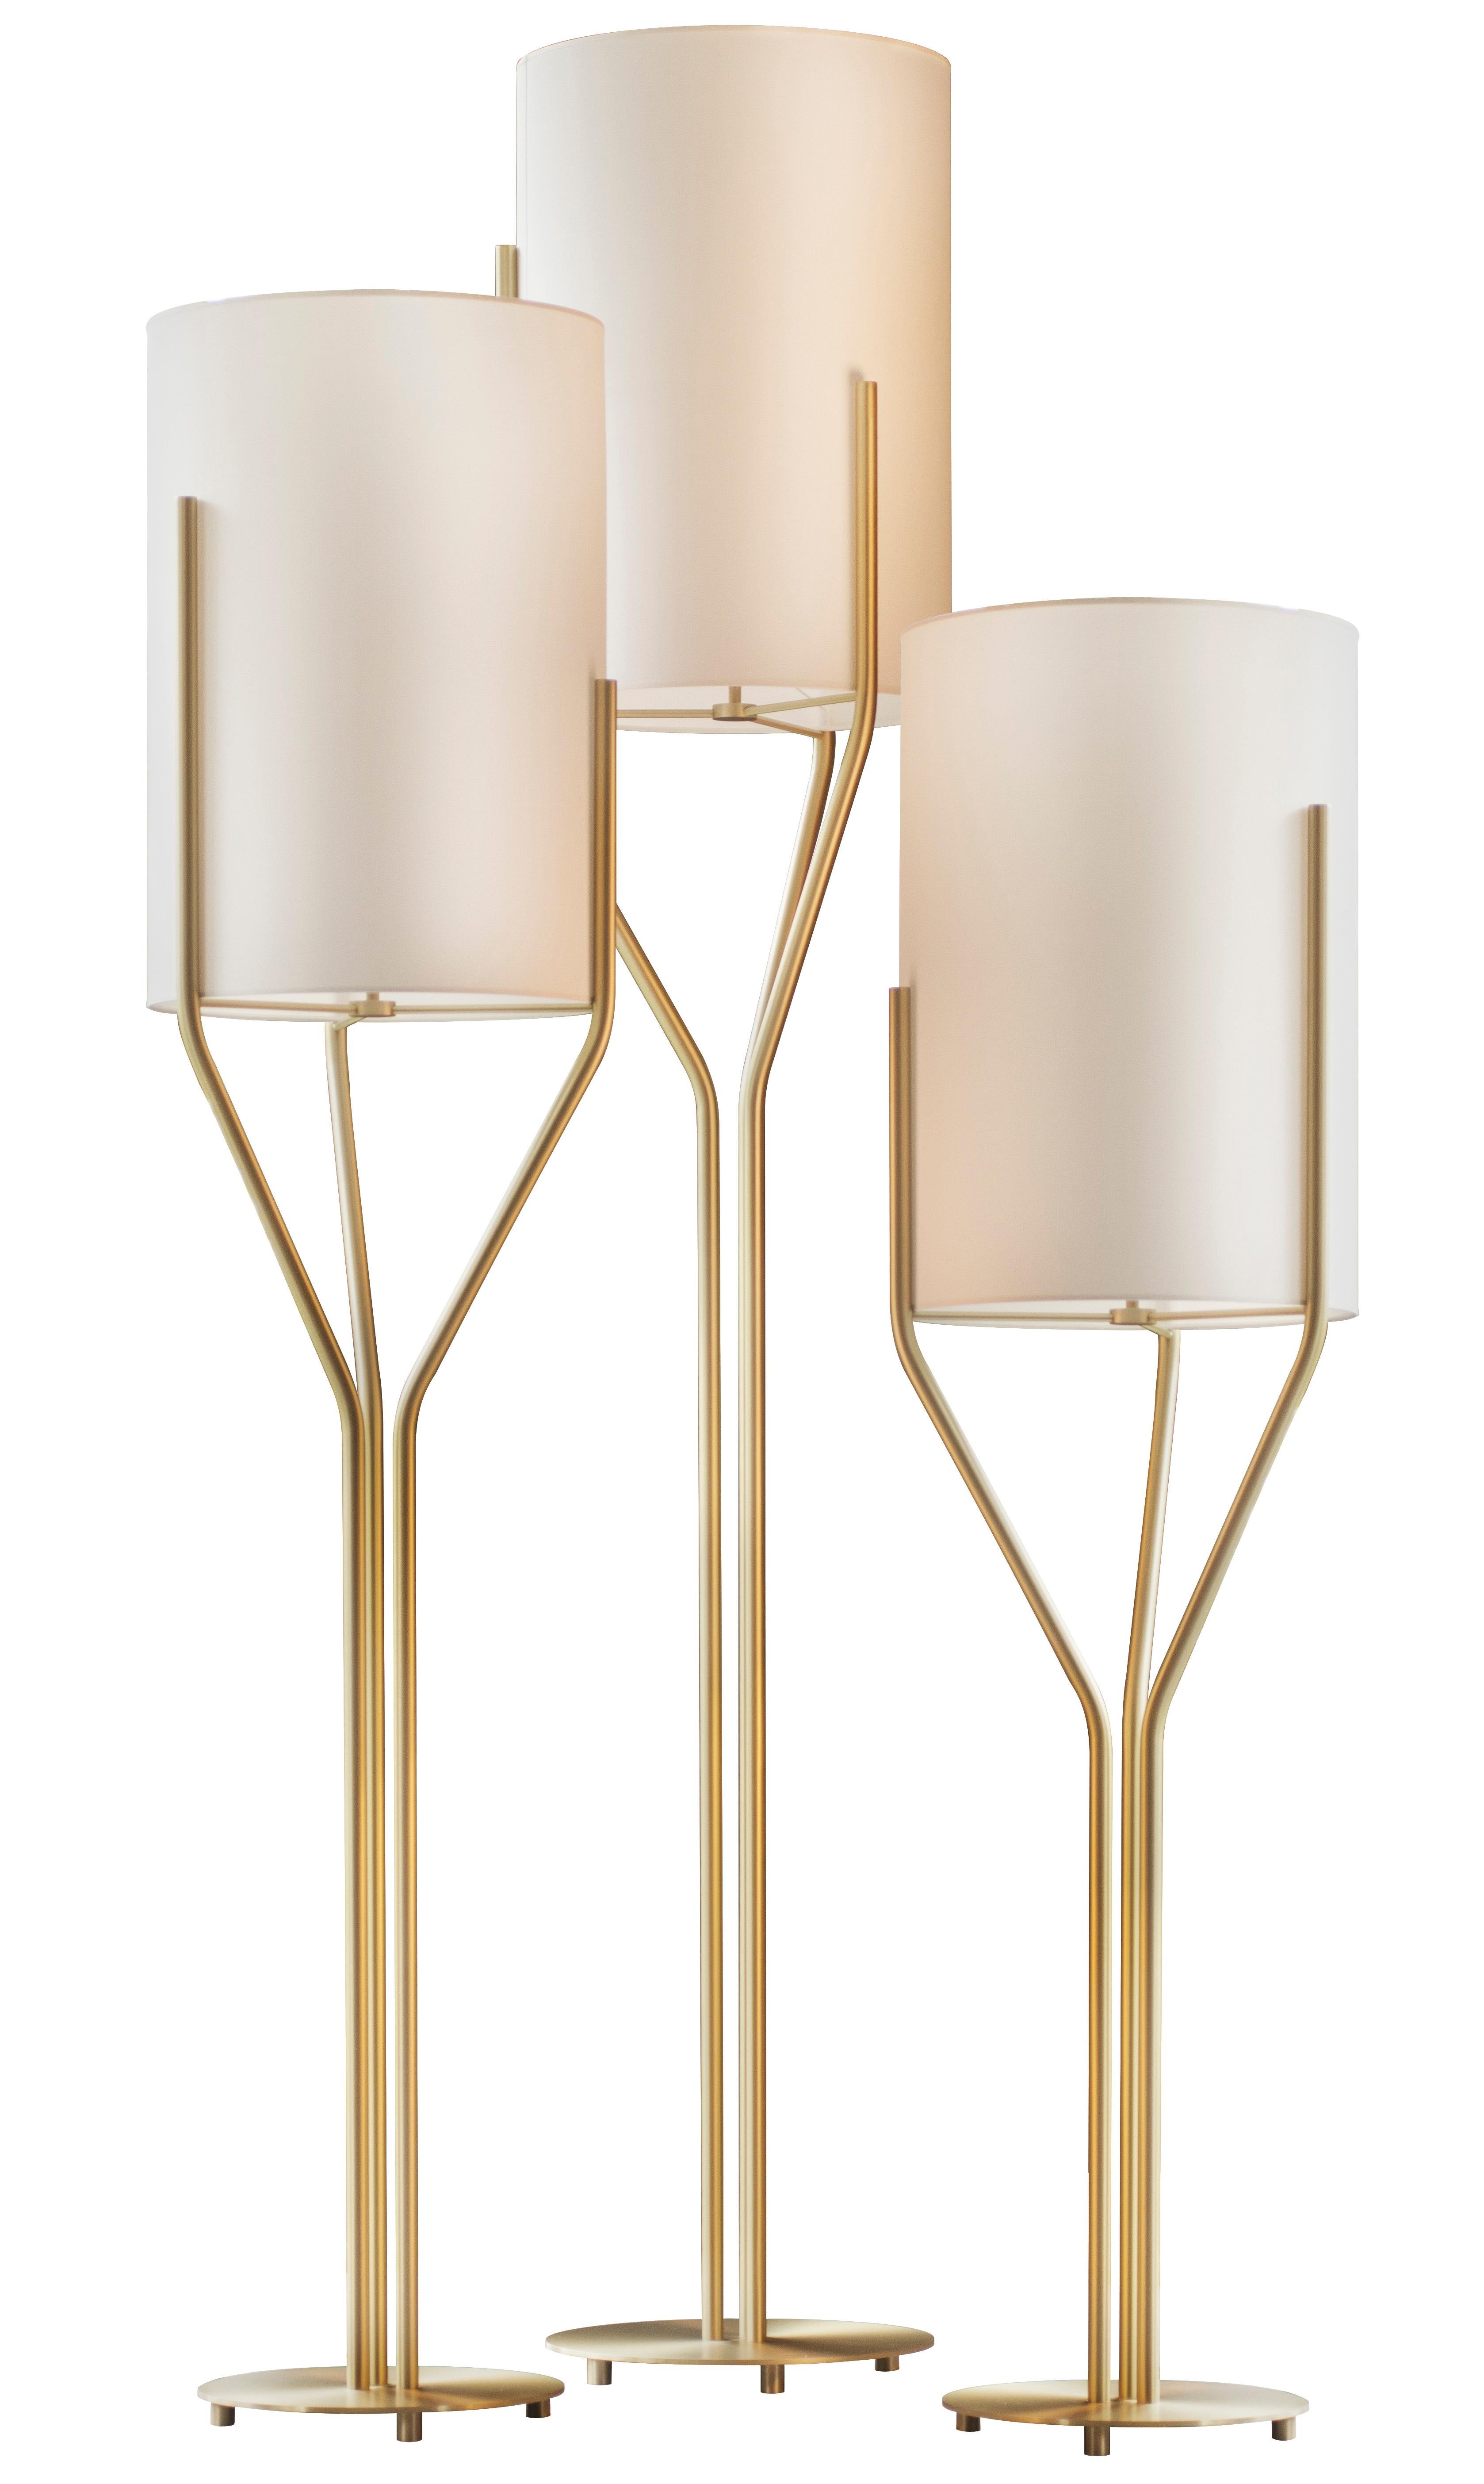 French Arborescence Xl Satin Brass Floor Lamp by Hervé Langlais For Sale